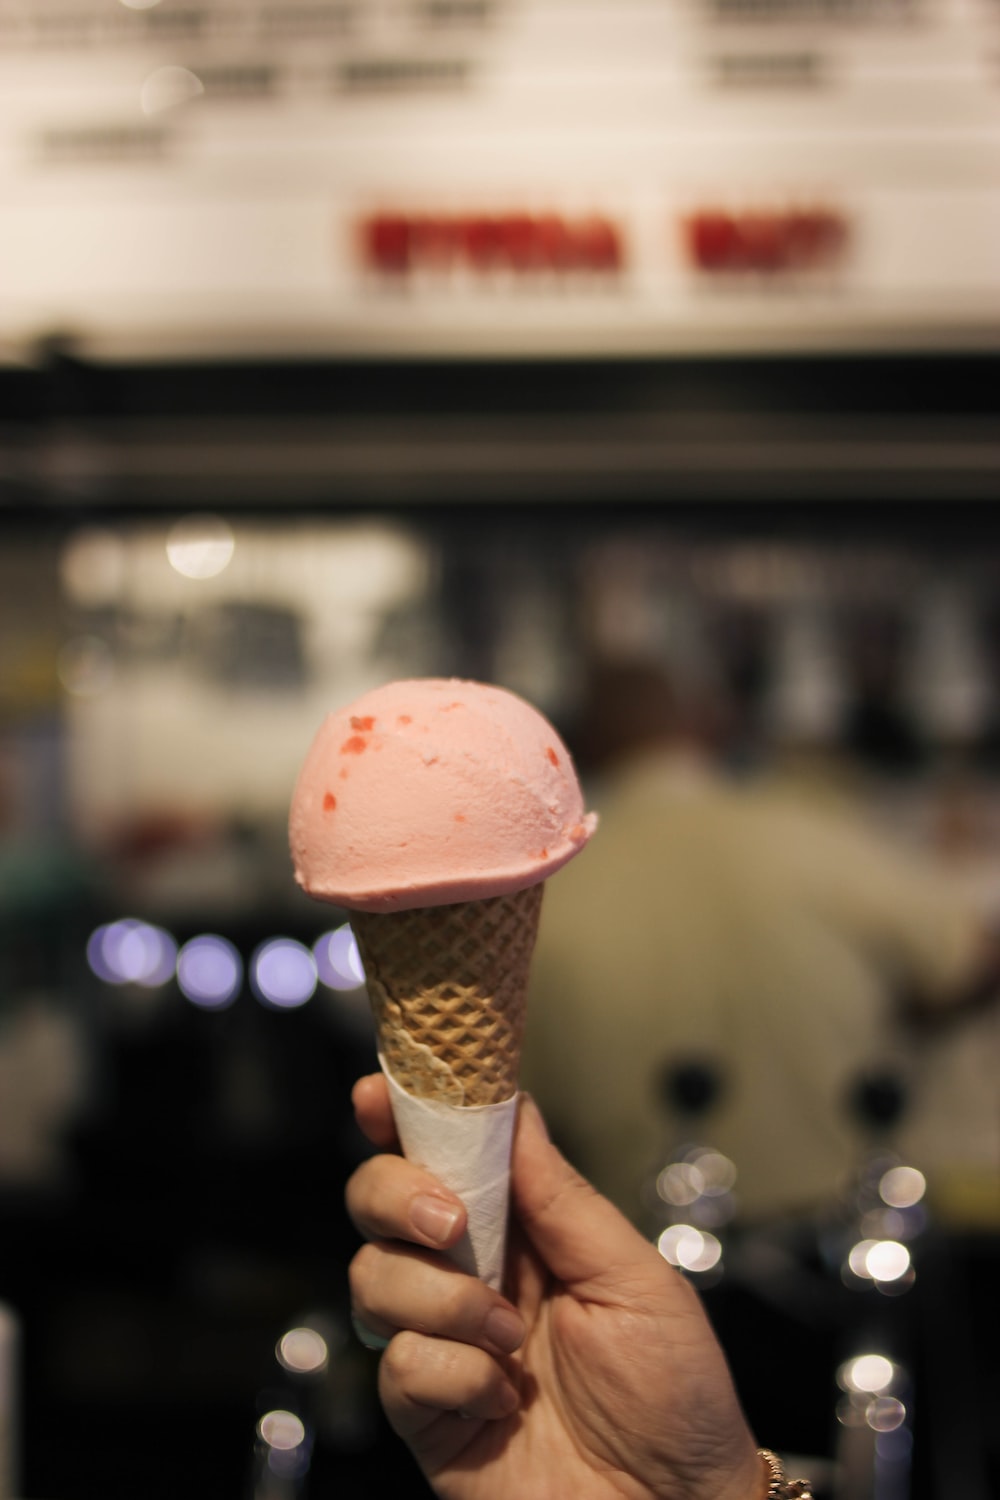 a person holding an ice cream cone